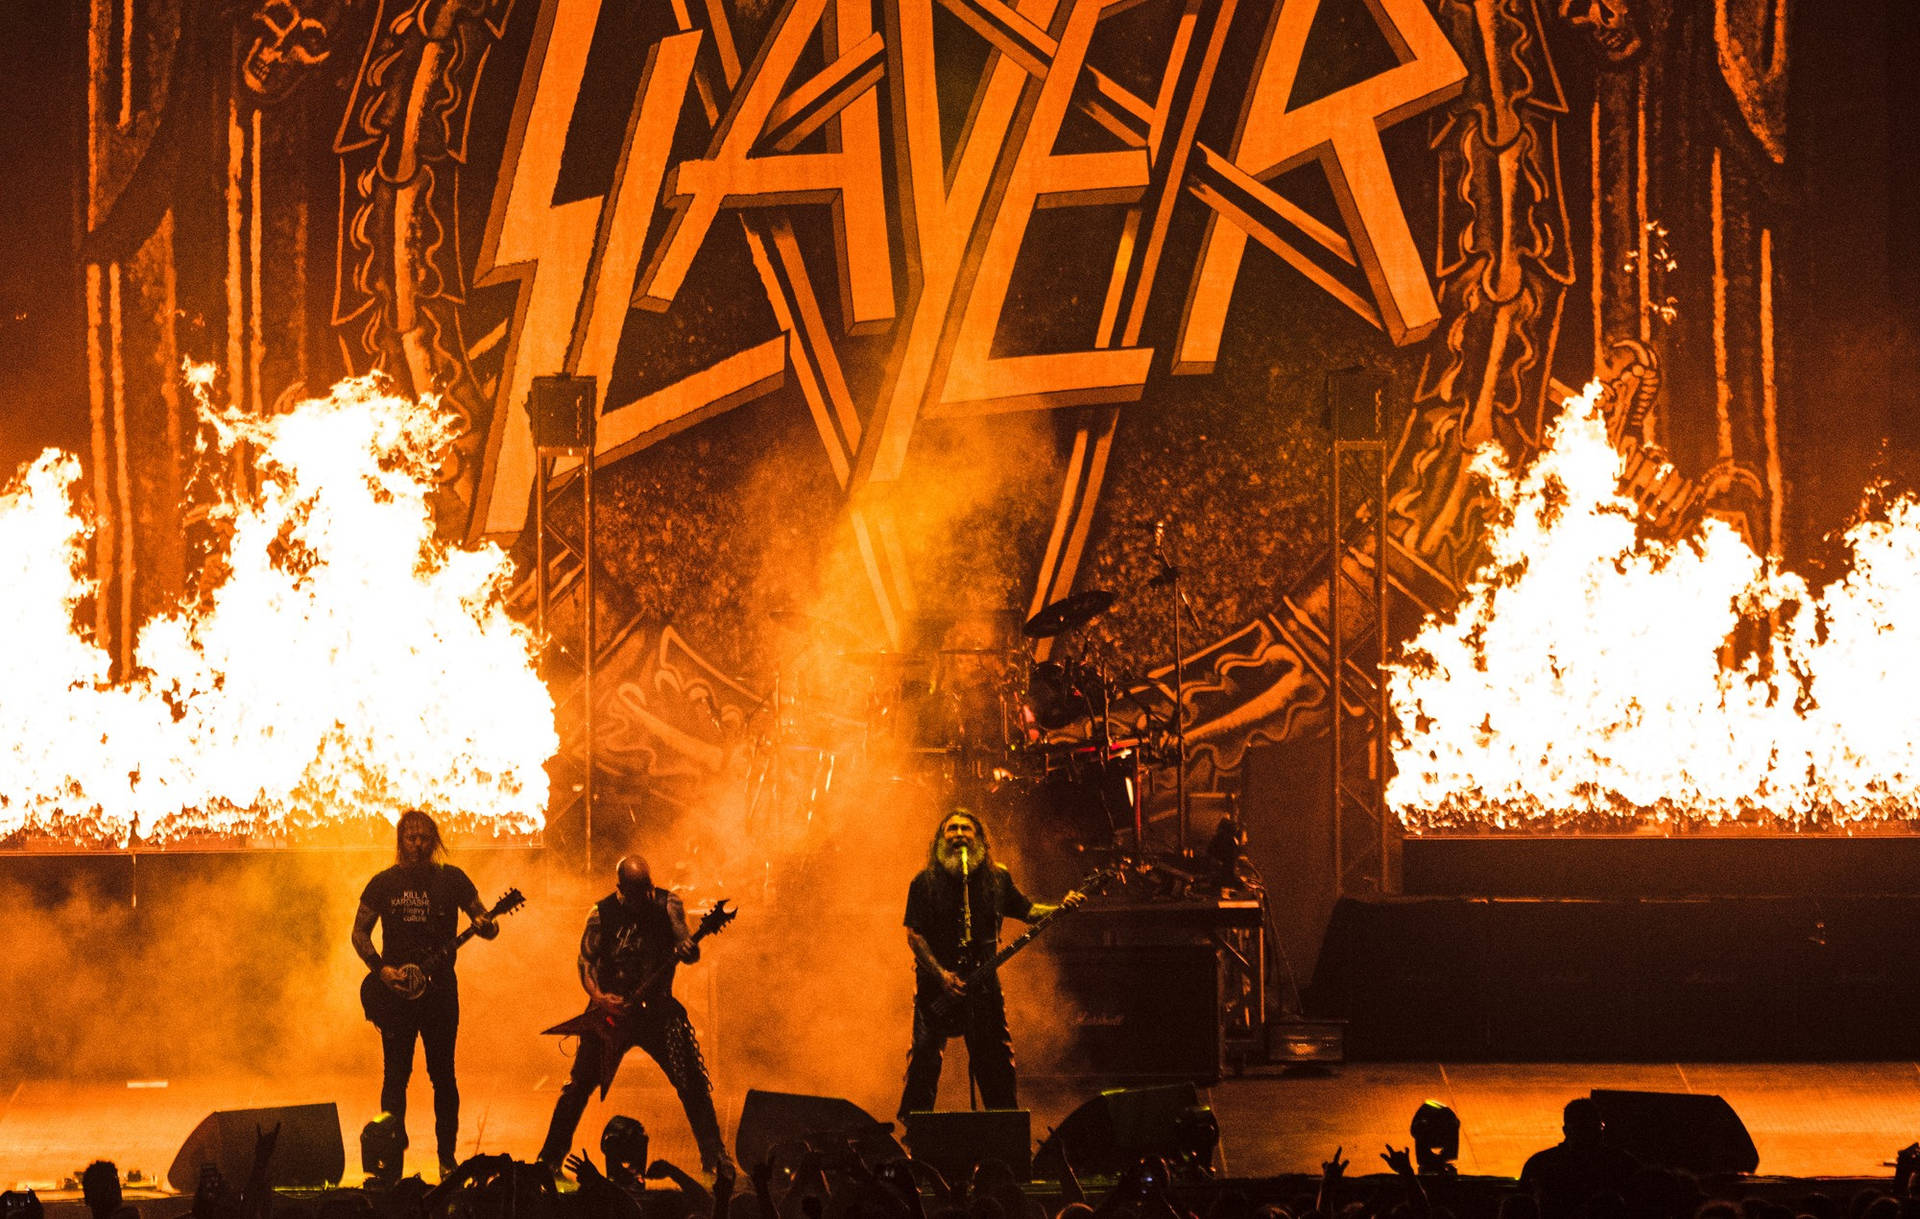 An electrifying performance by Slayer, a titan in the world of Thrash Metal. Wallpaper